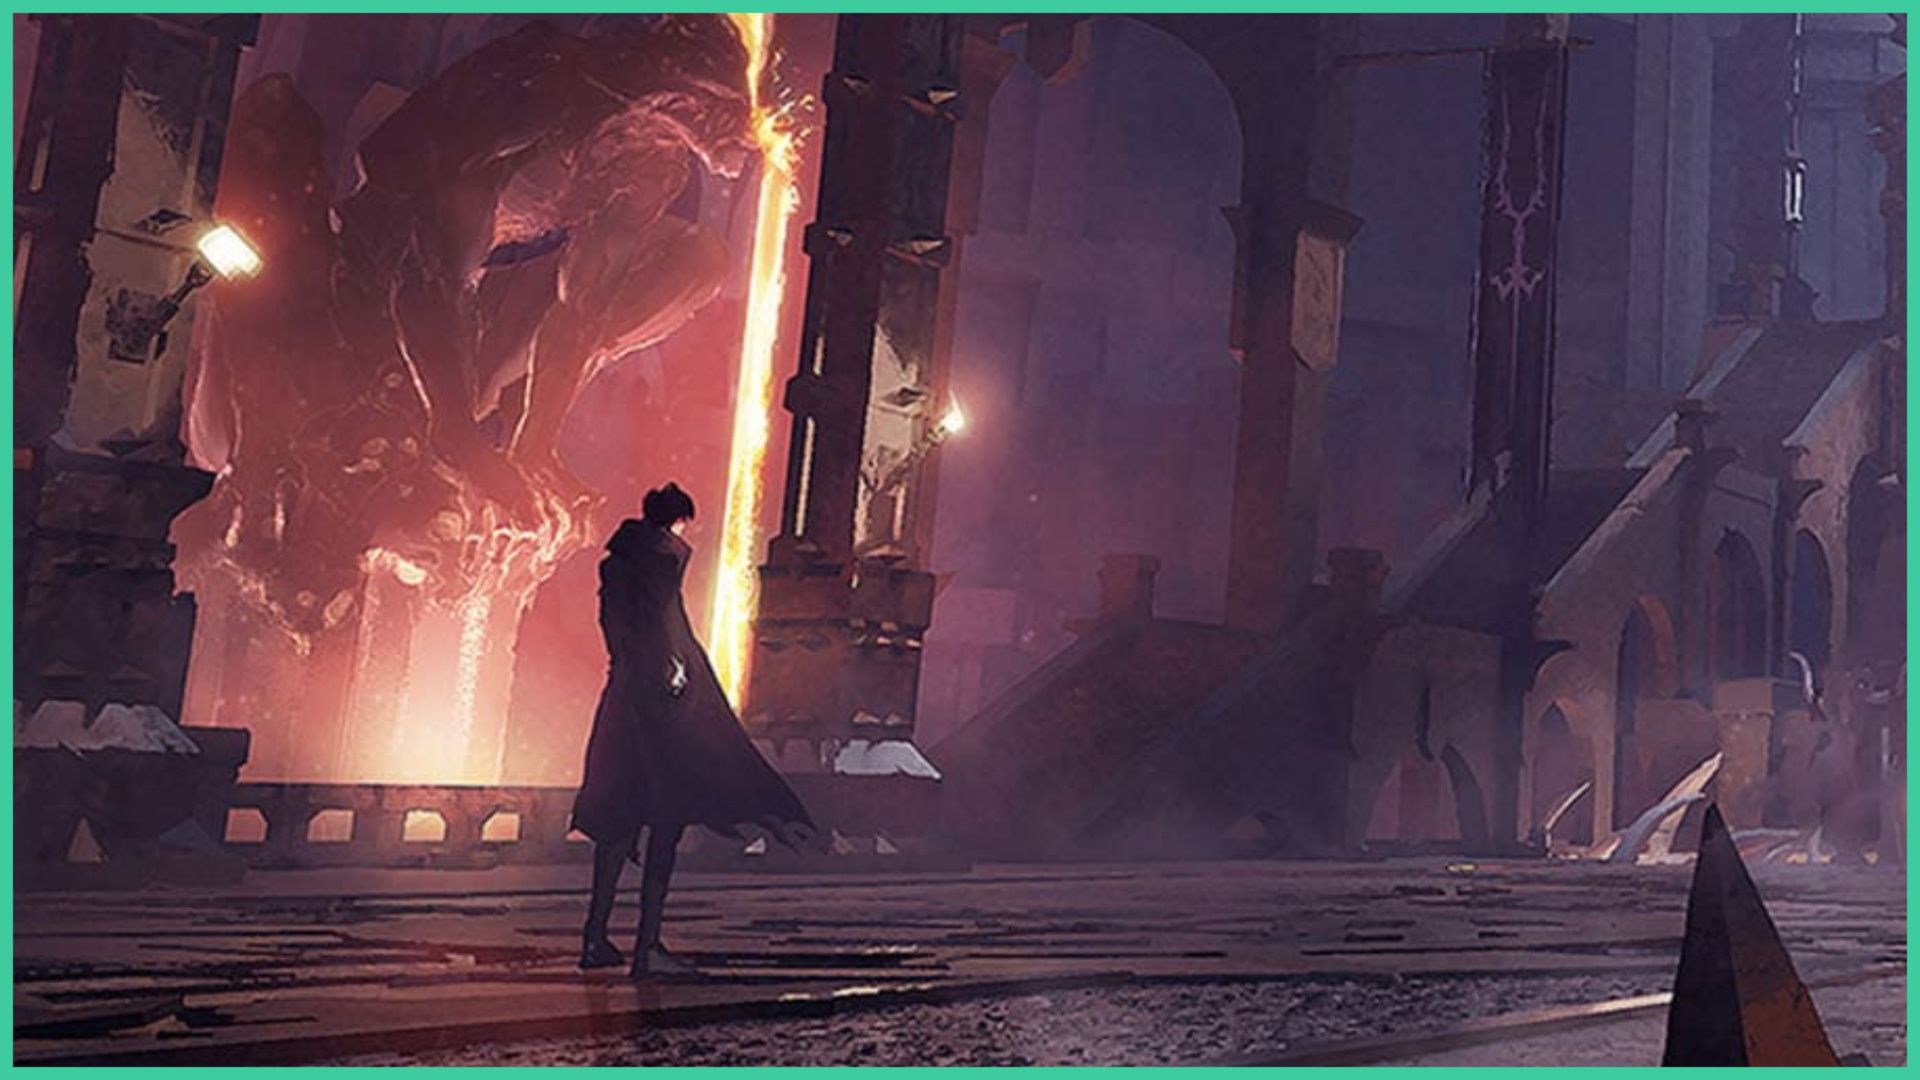 feature image for our solo leveling arise weapon tier list, with promo art for the game of sung jin-woo standing in a stone temple underground, with lava pouring from a giant gargoyle to the left, a large stone staircase going up to an upper level, and an uneven stone floor